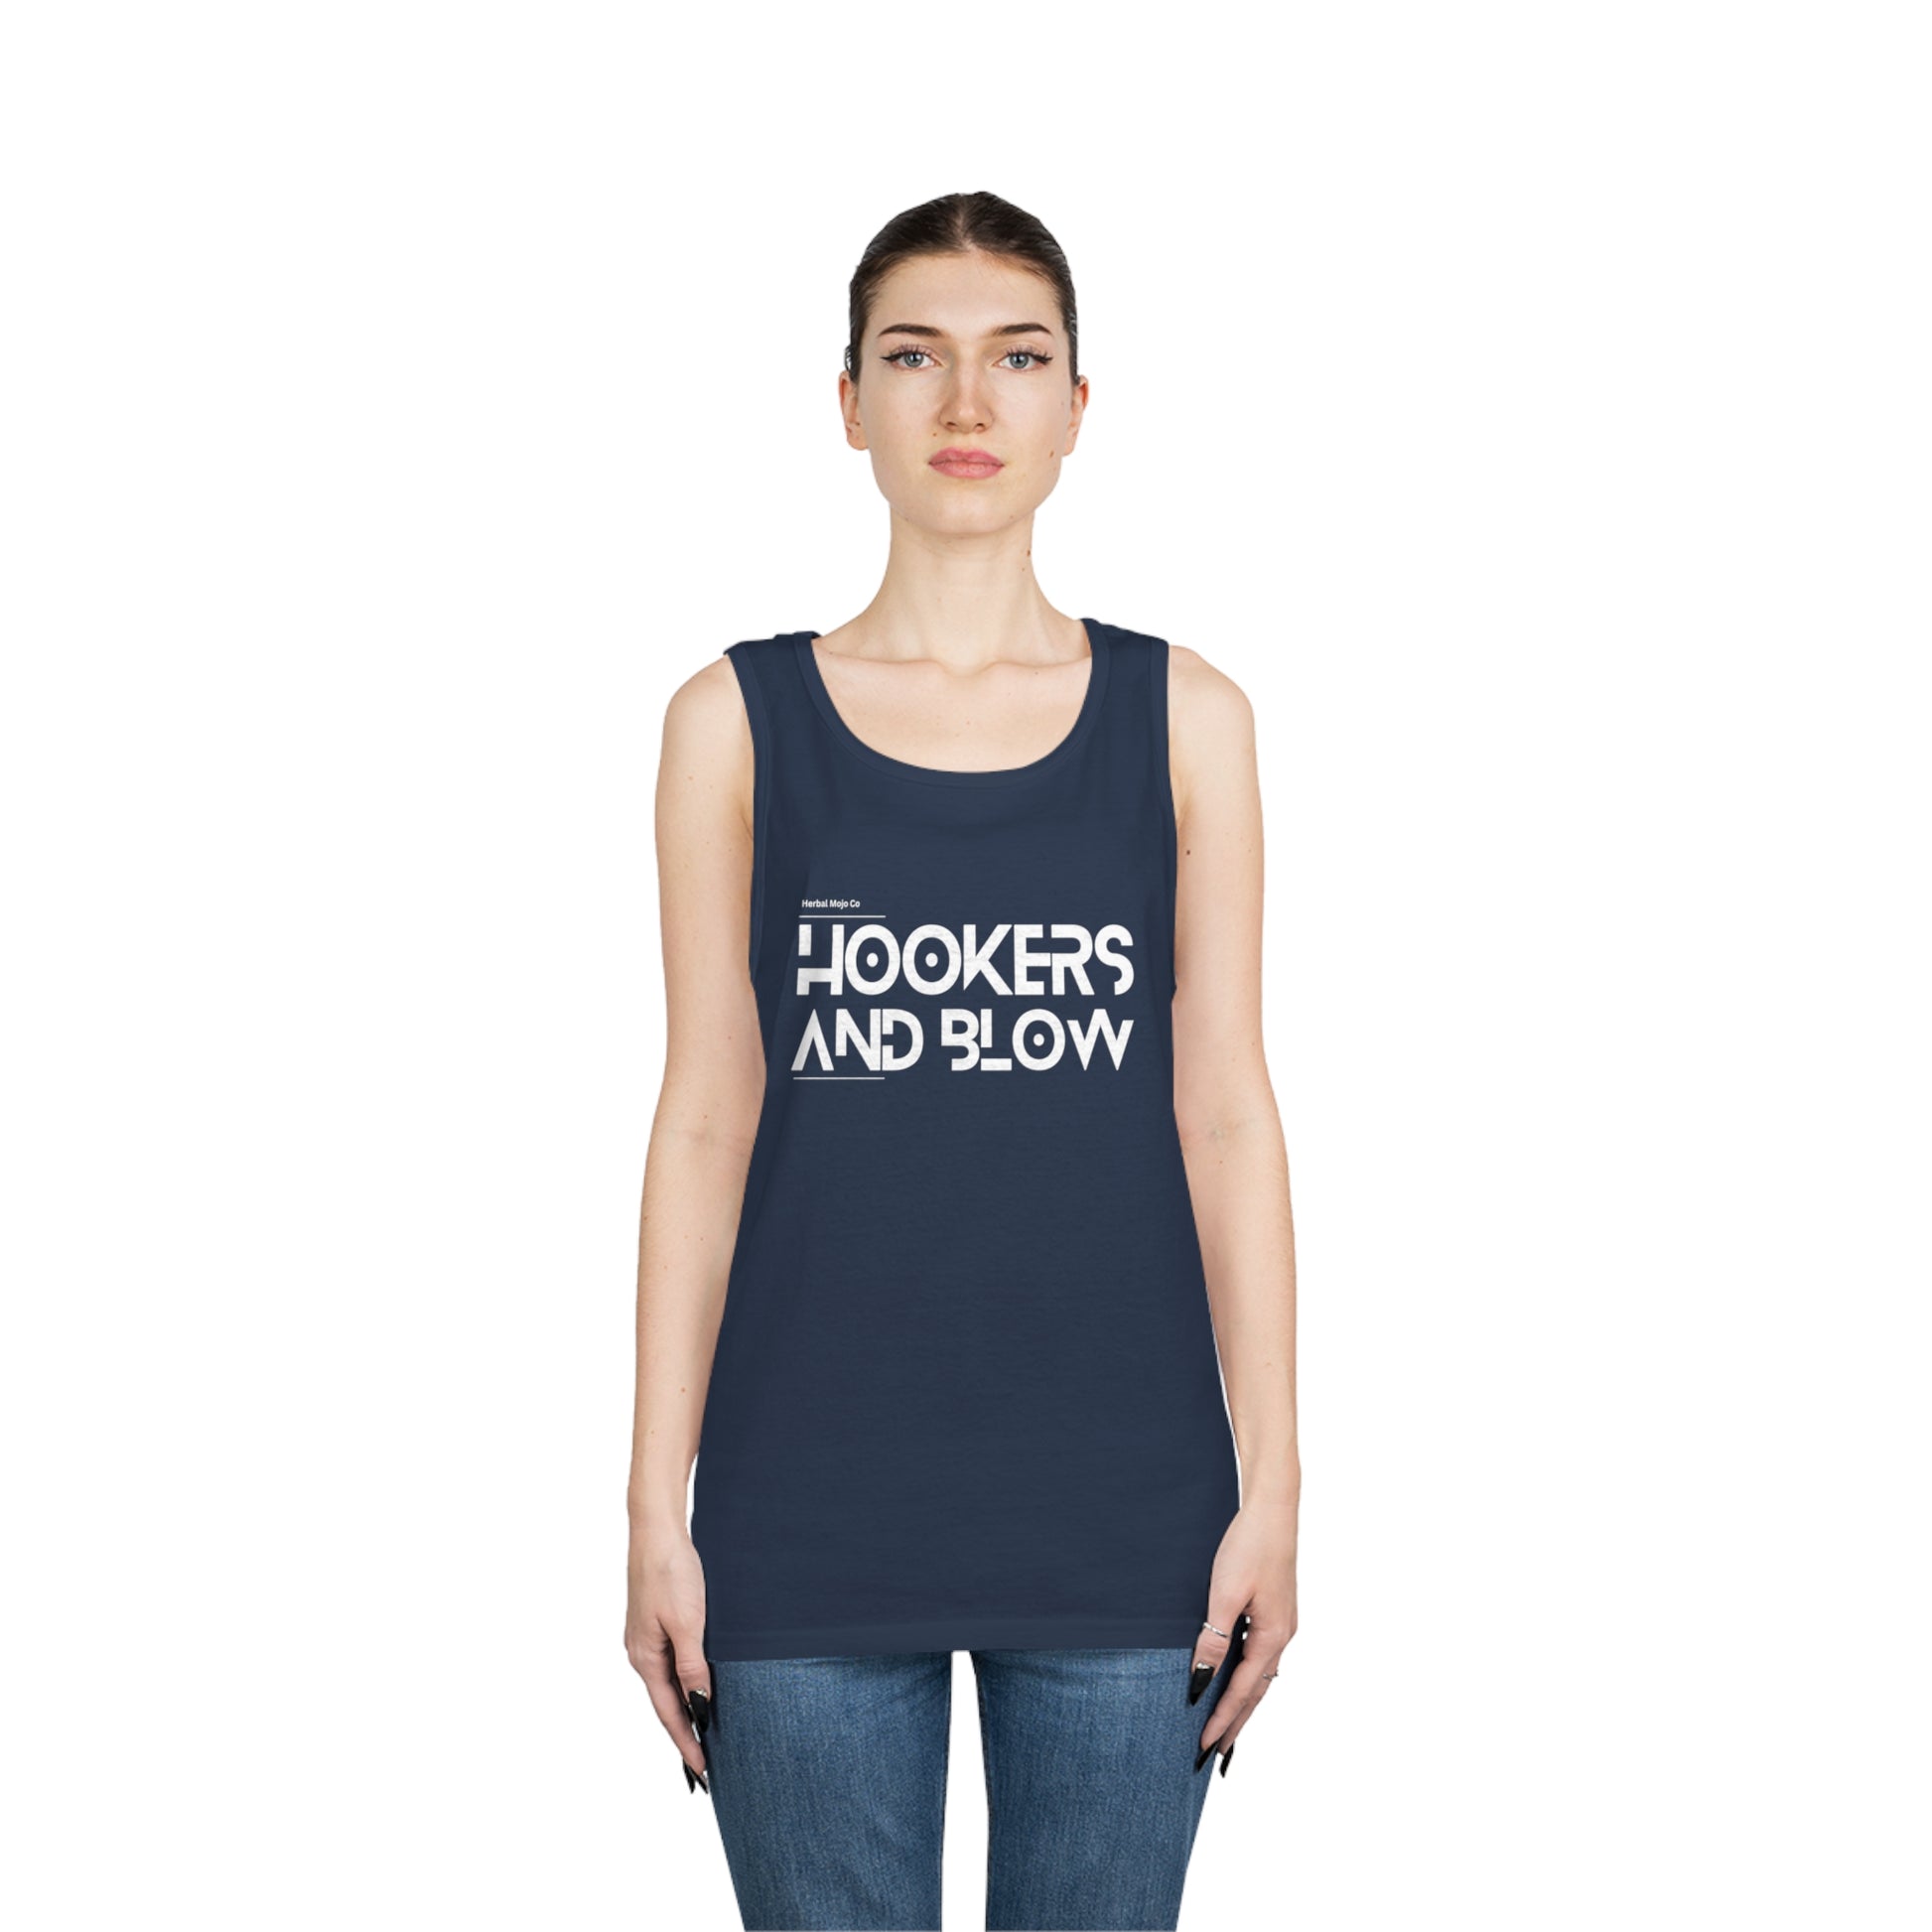 Navy Blue Stamina for Men Hookers & Blow unisex cotton tank top product shot shown in context worn my female with white background